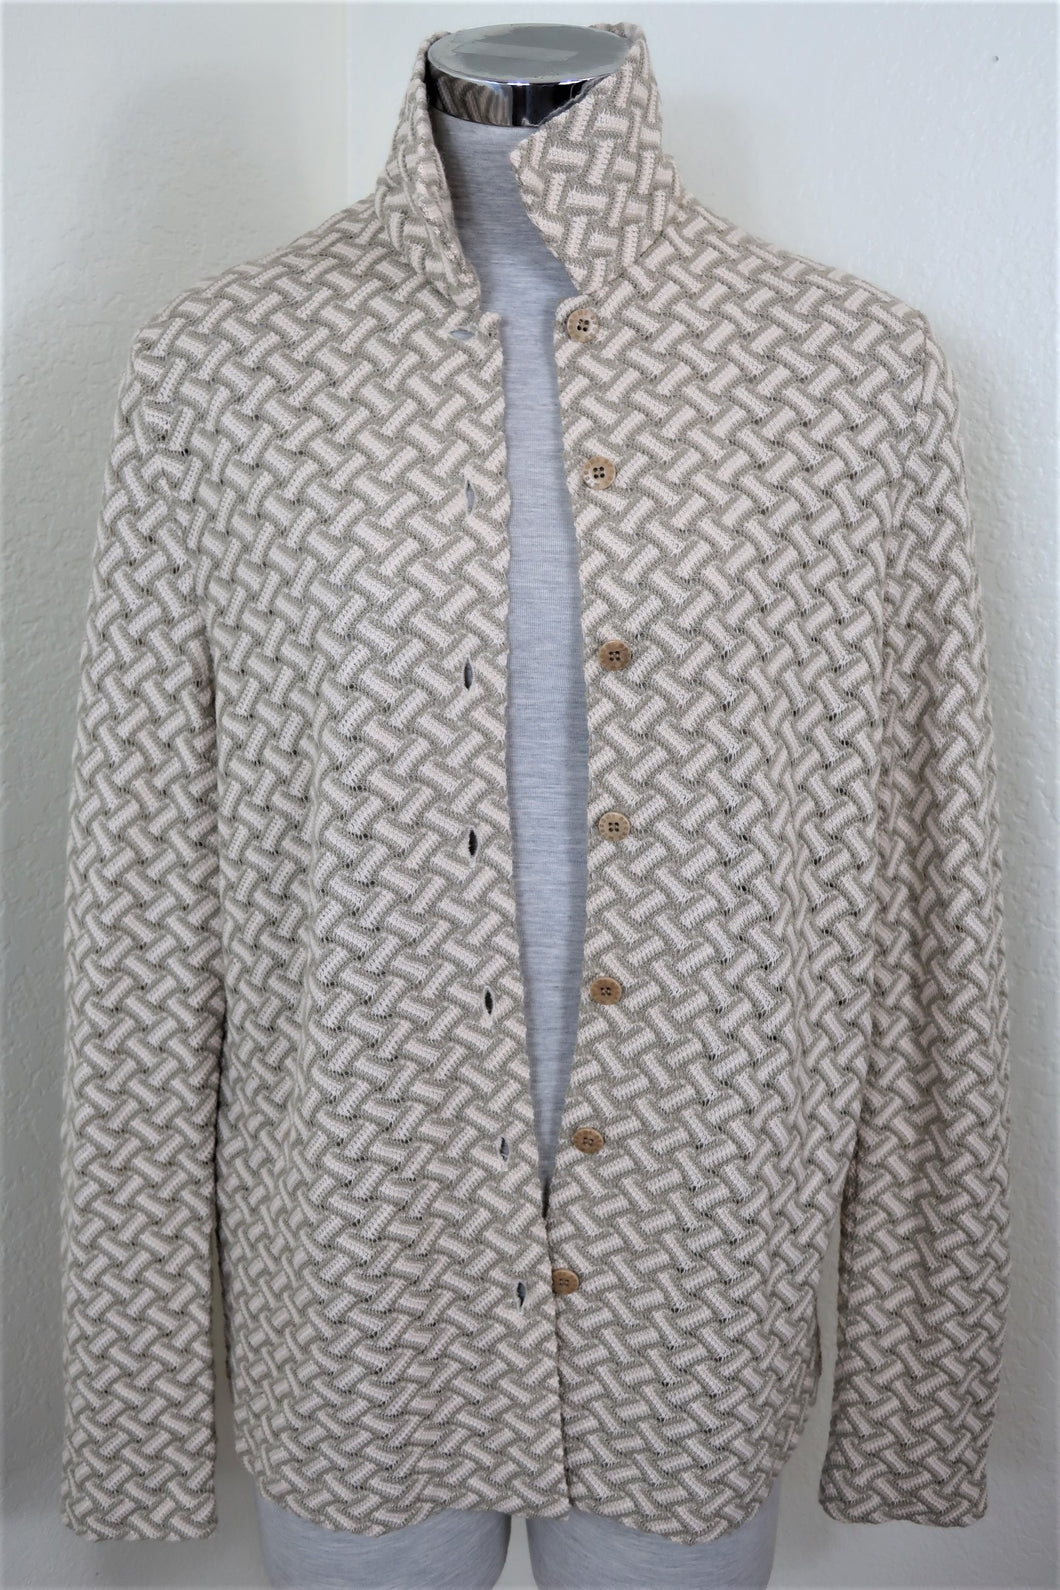 Vintage MISSONI SPORT Knitted Wool Acrylic Sweater Cardigan Button Jacket Blouse 44 7 8 10